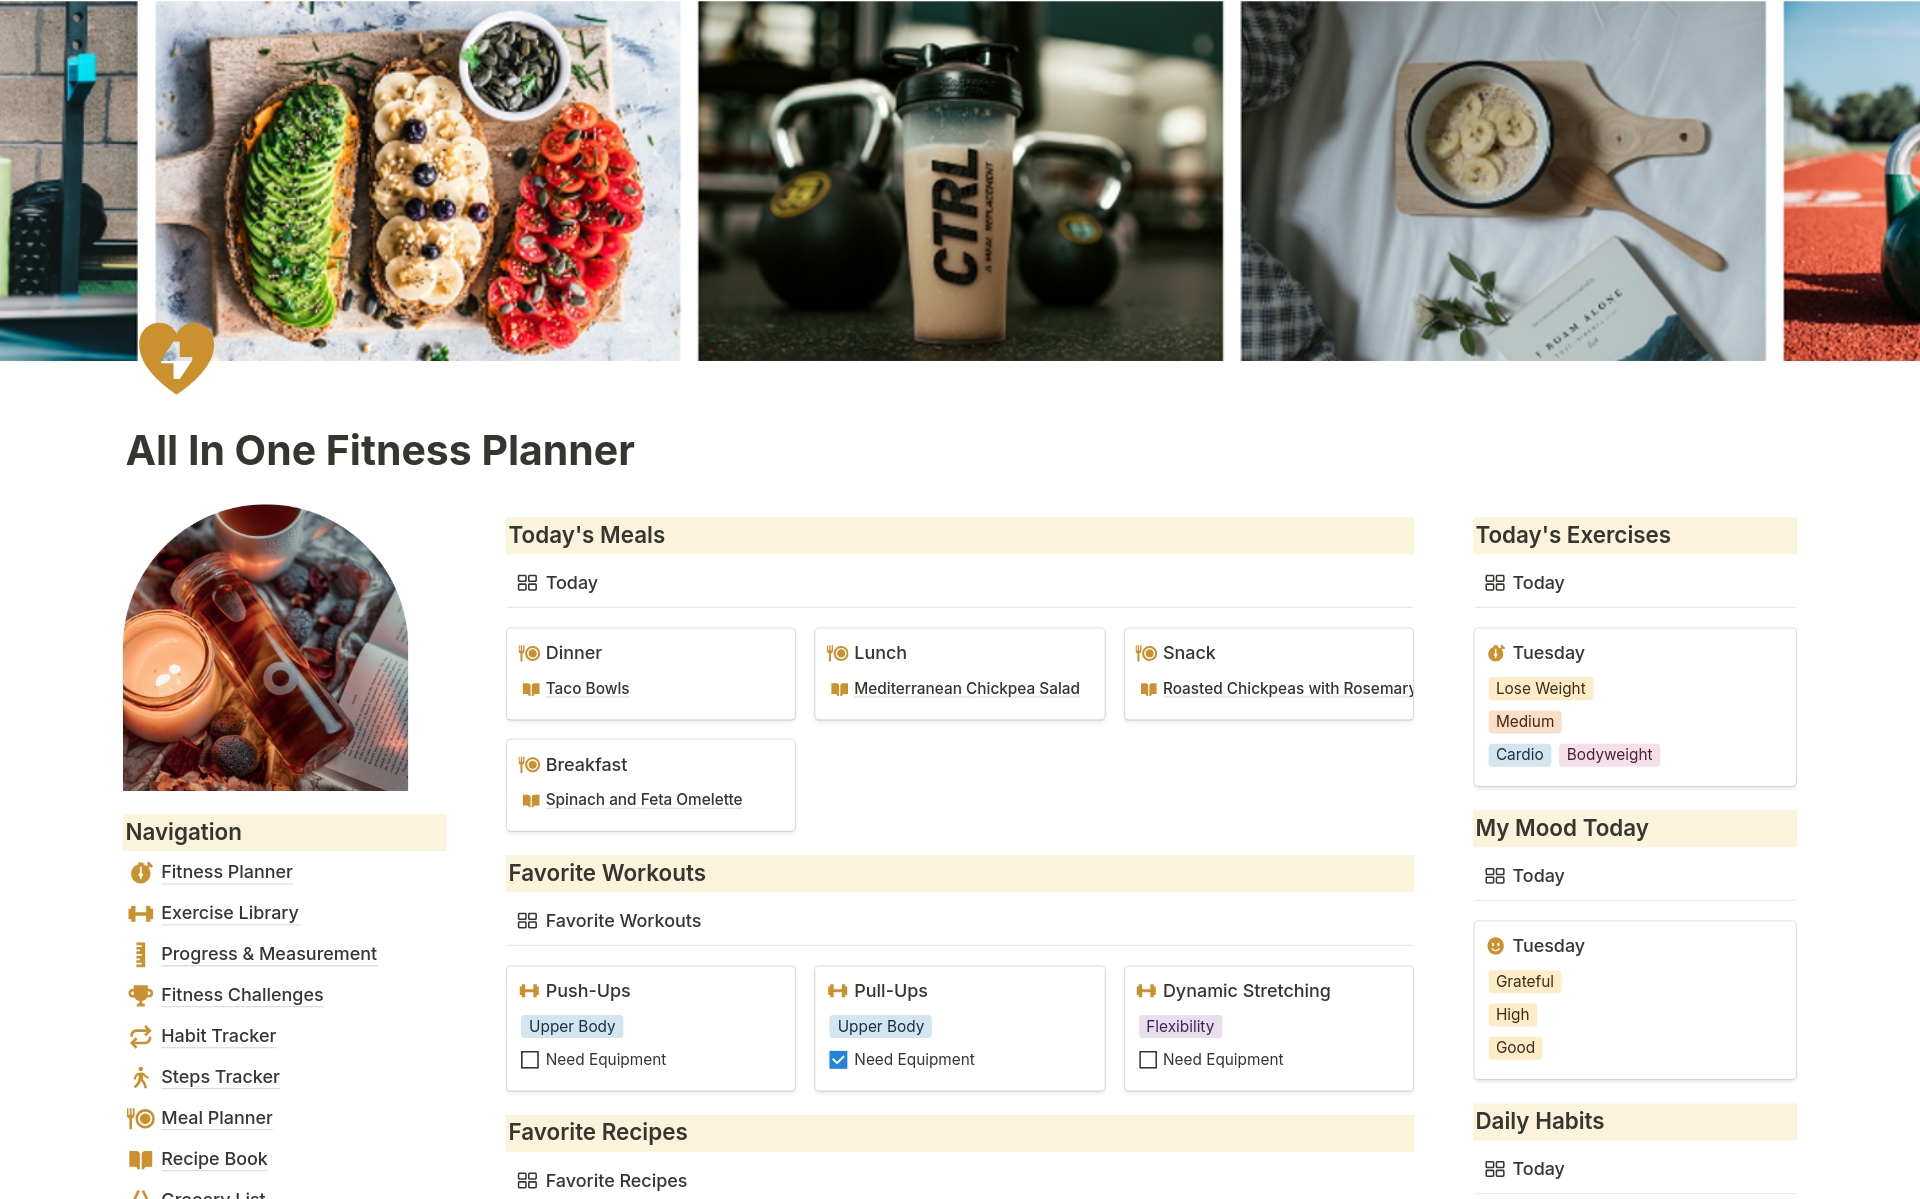 Streamline your fitness journey with our All in One Notion Fitness Planner! Effortlessly track workouts, plan meals, and monitor progress in one aesthetically pleasing notion template. From exercises to meal plans, achieve your goals with ease and style.